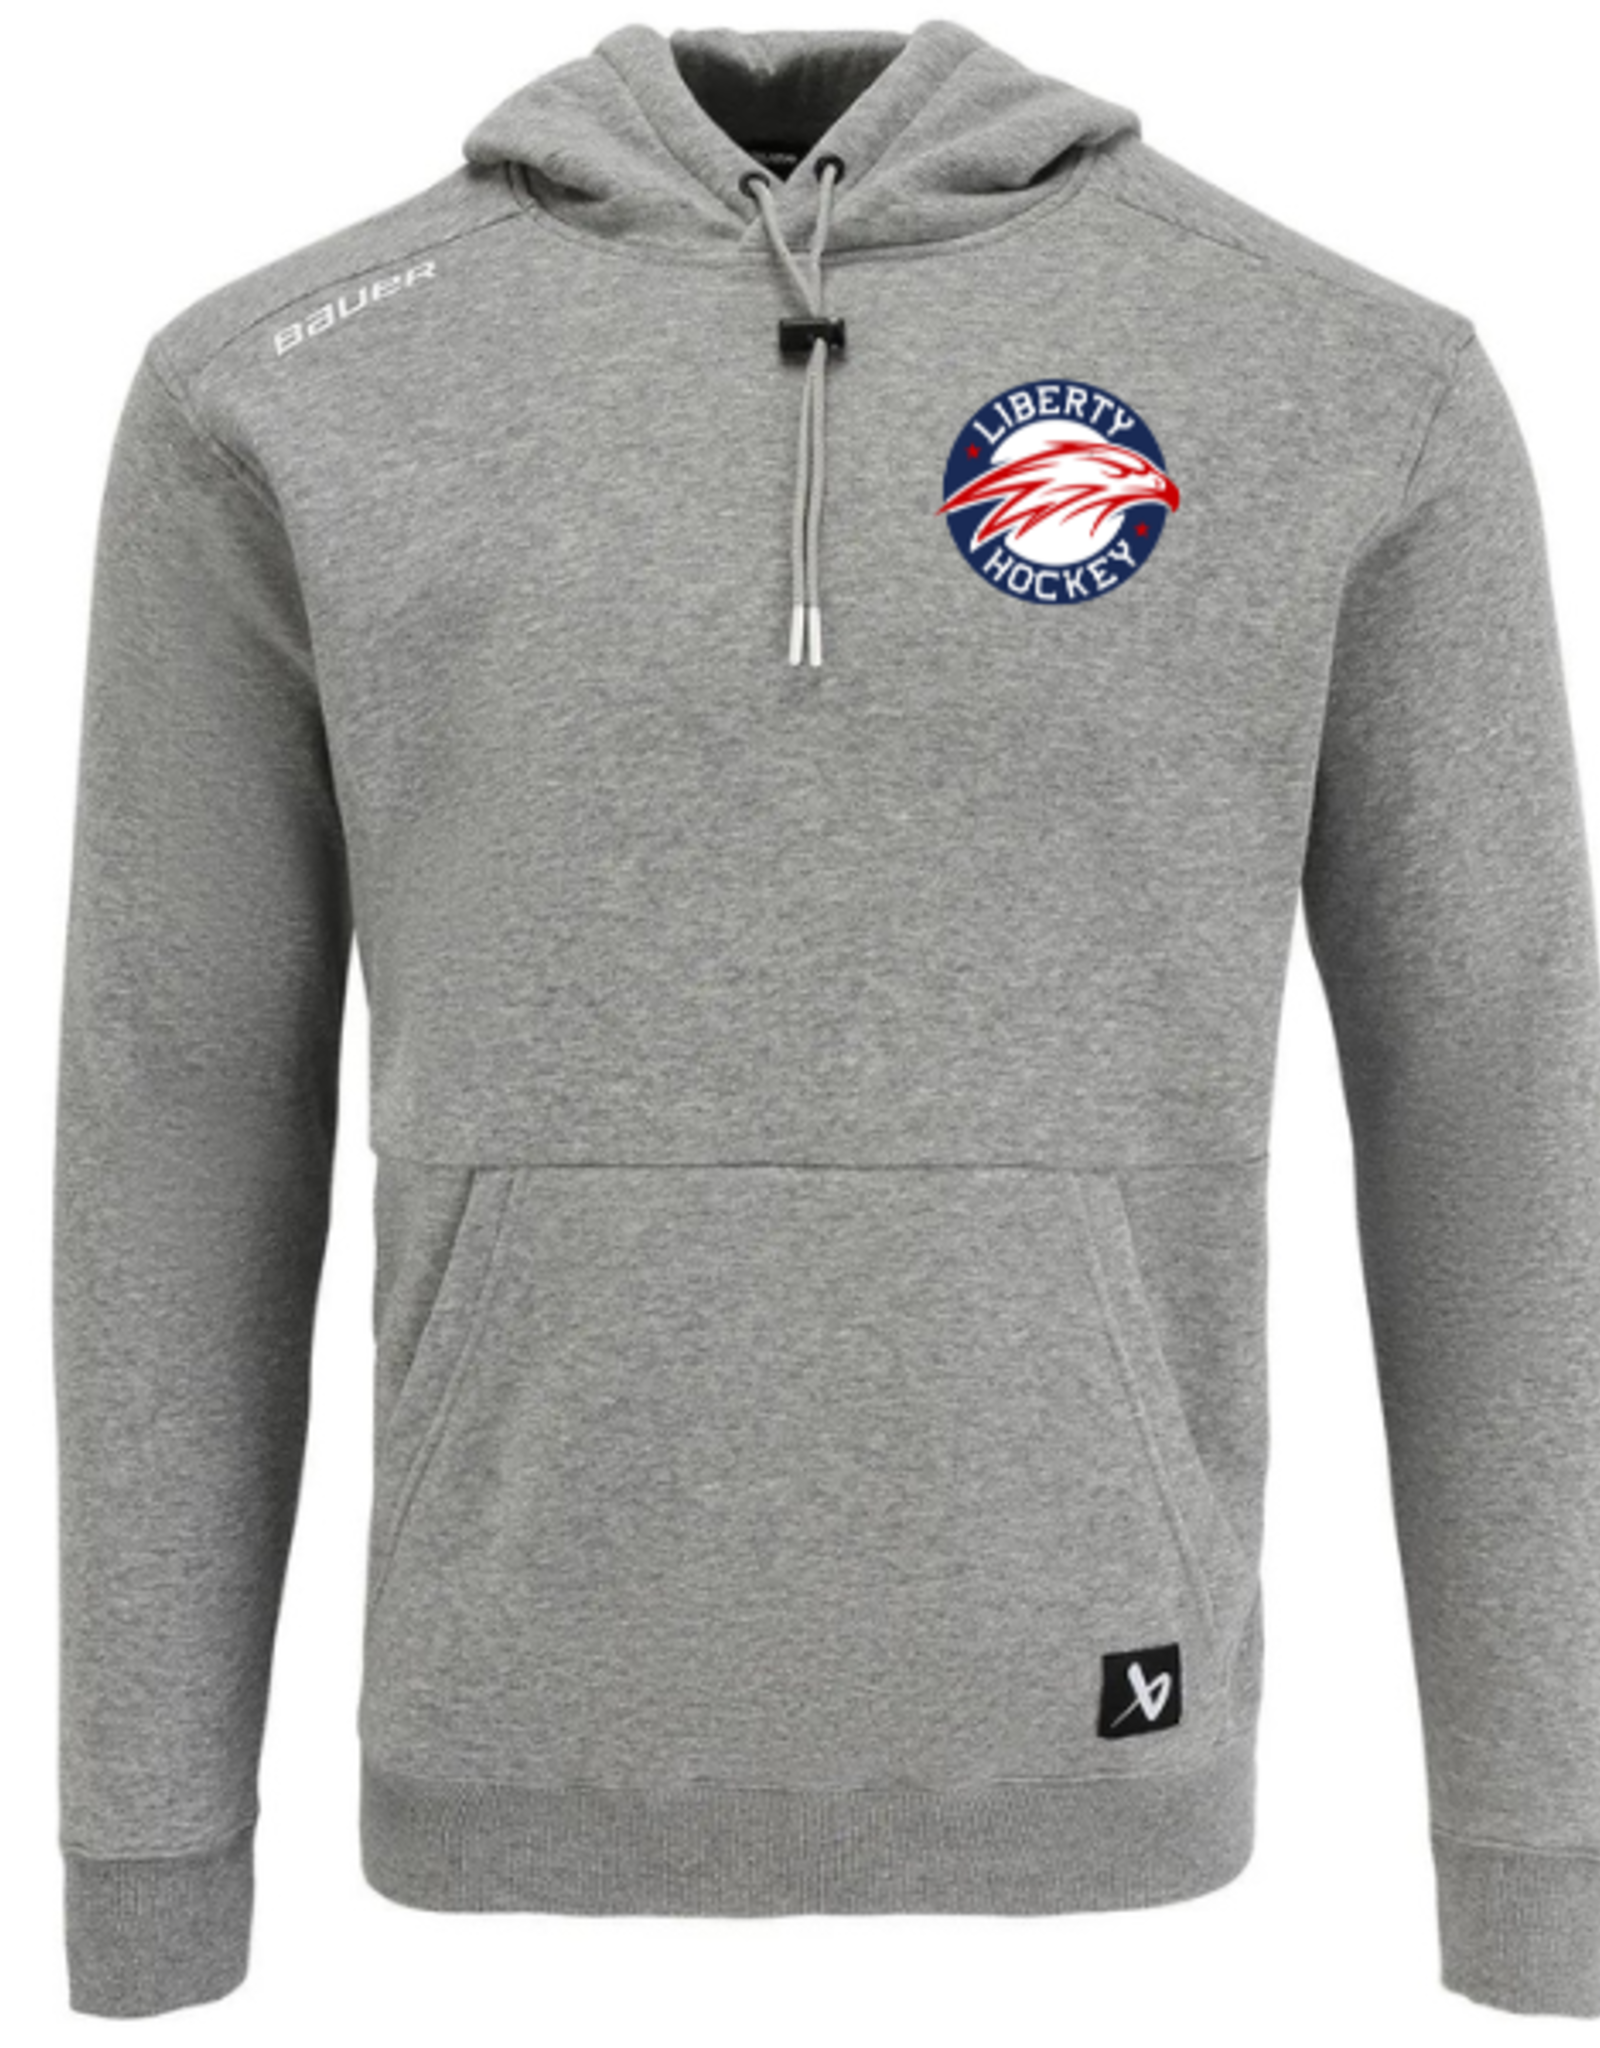 Bauer Liberty Bauer Ultimate Hoodie (YOUTH) GREY